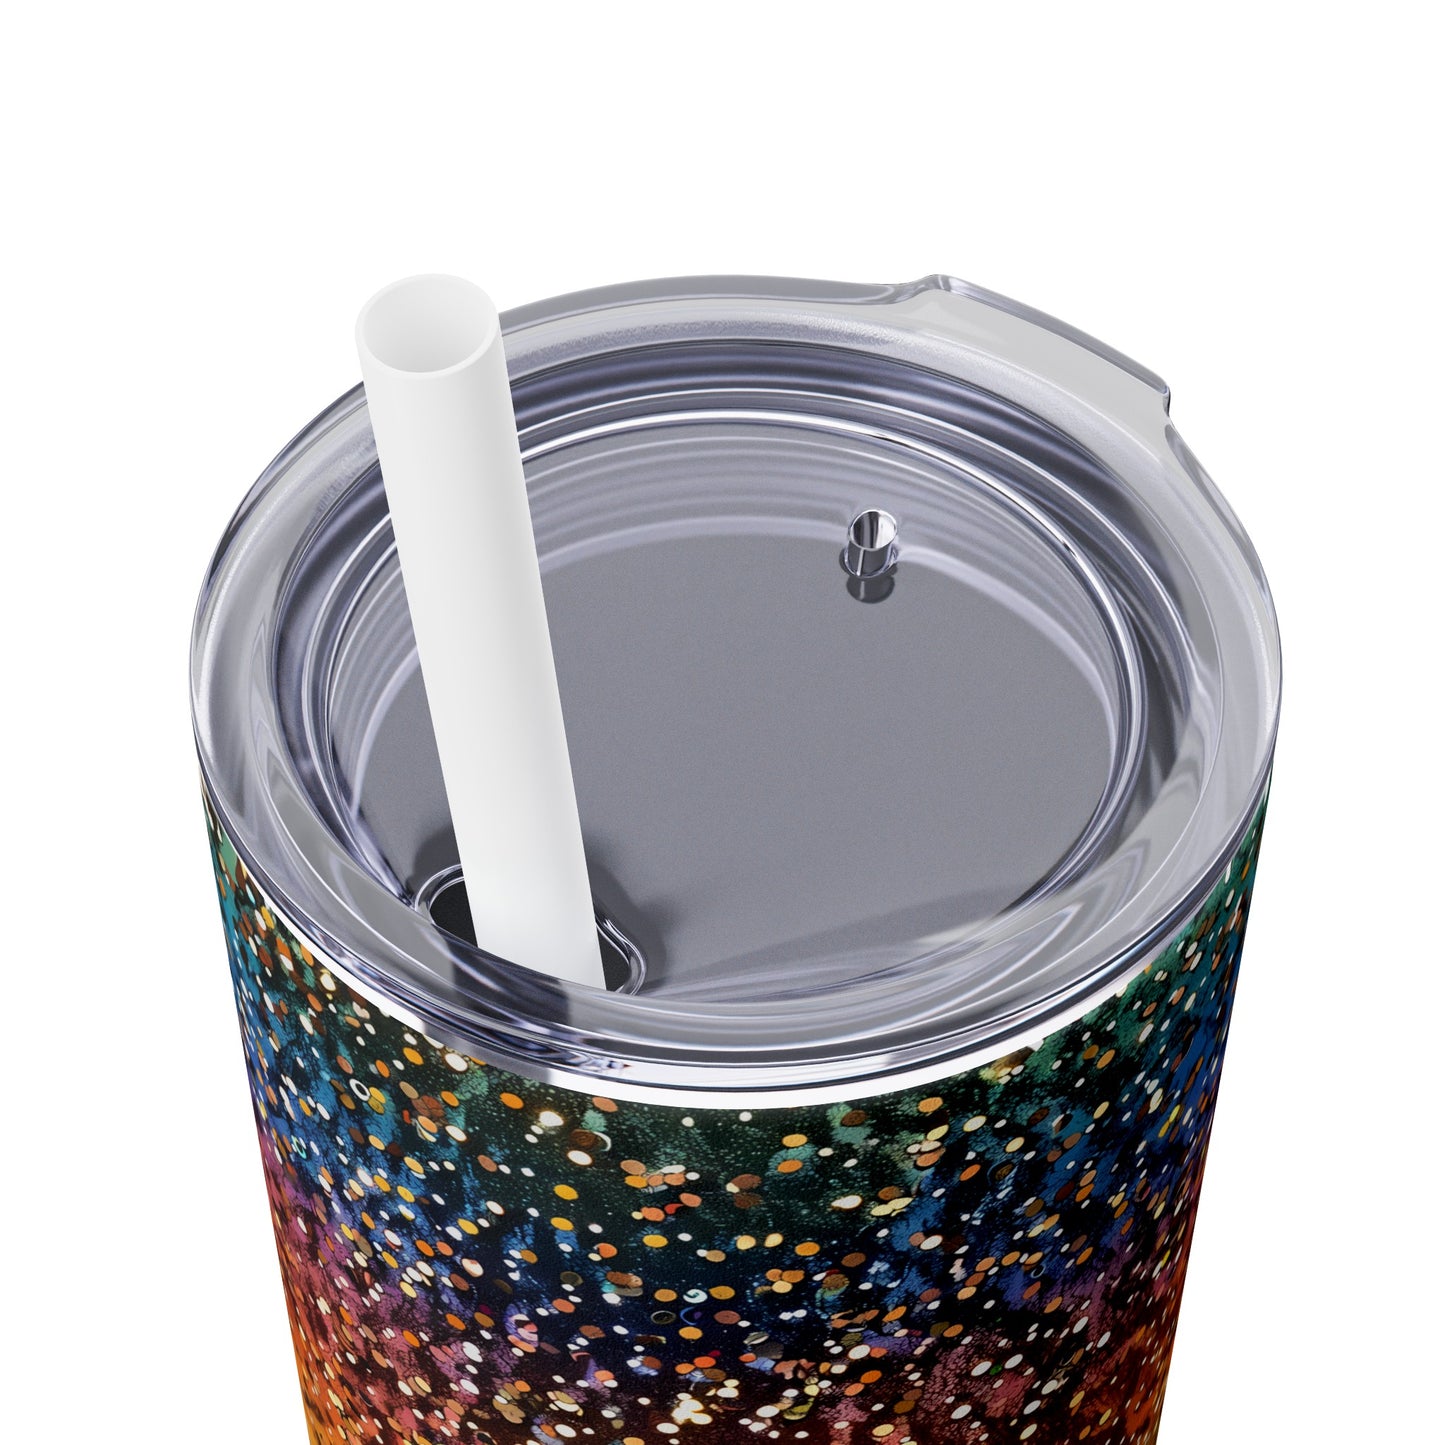 Stainless Steel Tumbler with Lid & Straw, 20 oz, Light Rainbow Glitter  - Double-walled, Keeps Drinks Hot or Cold